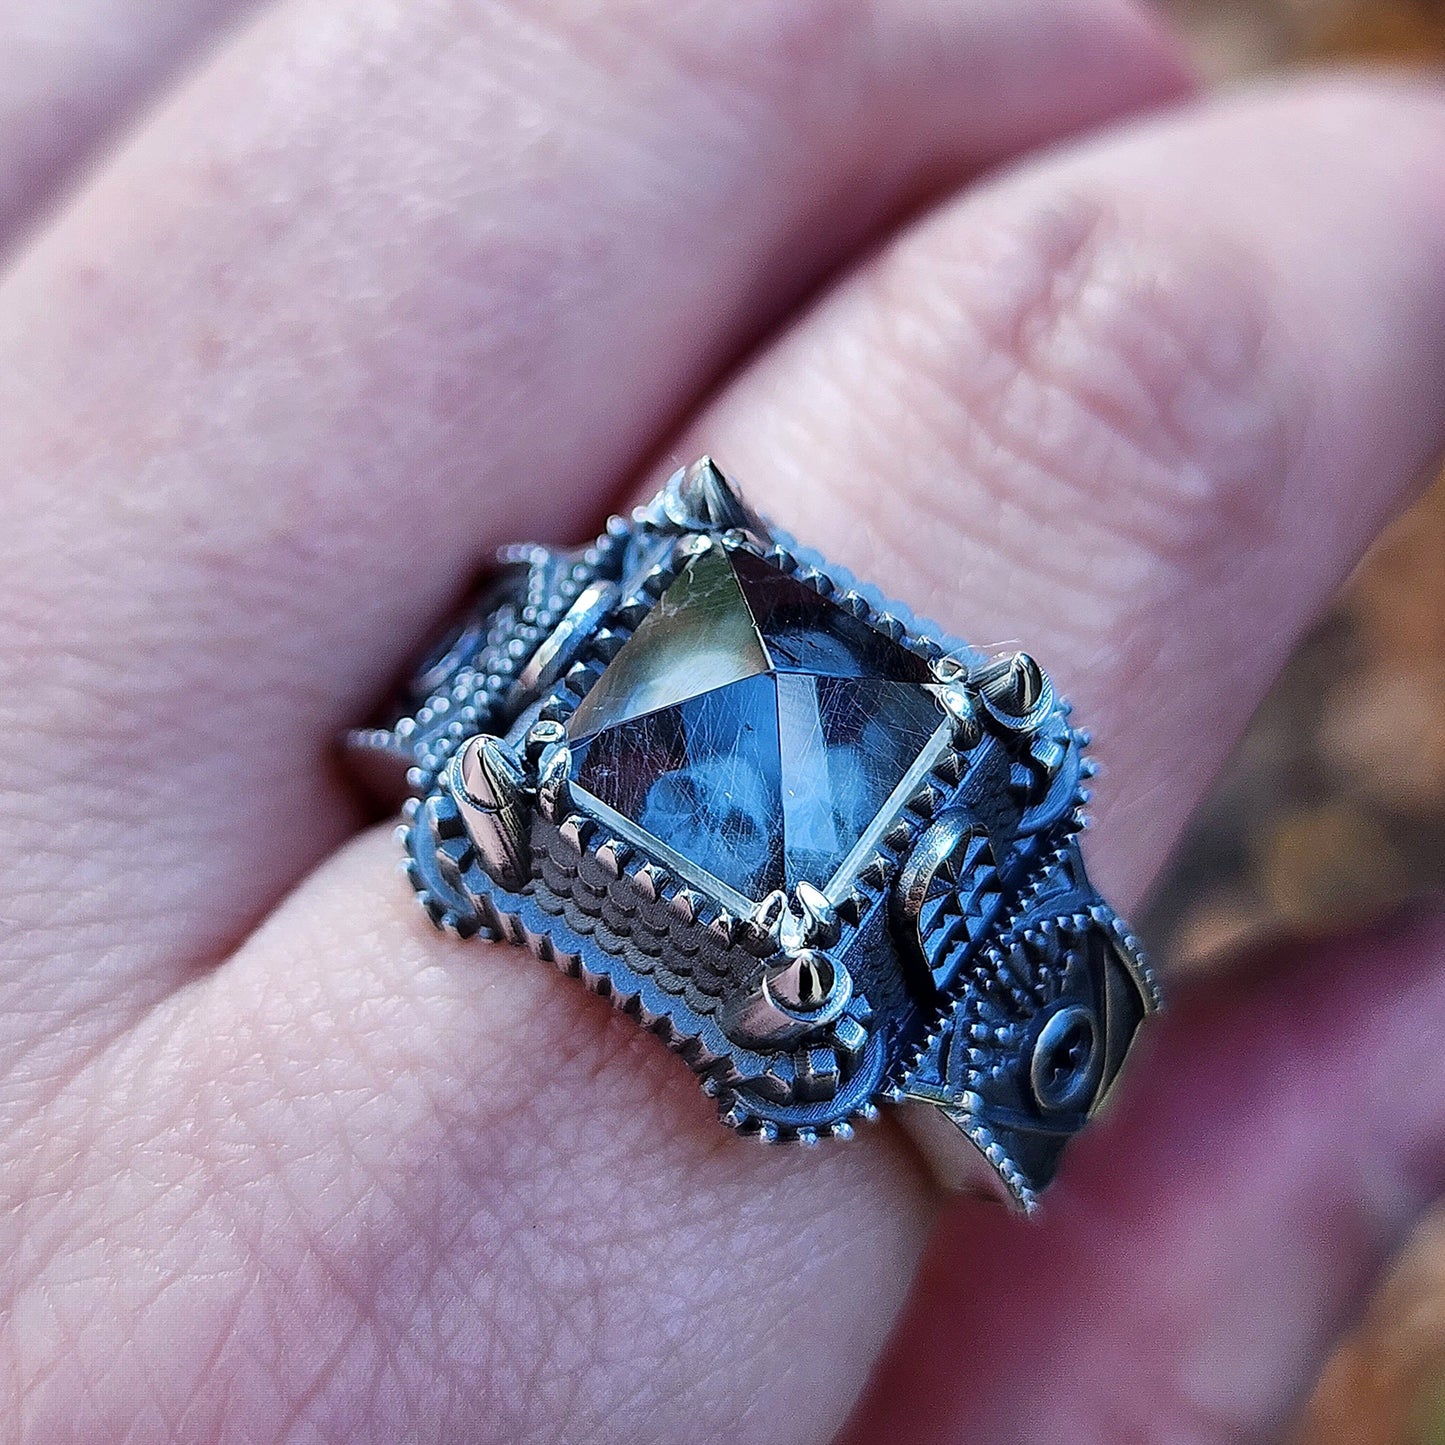 Ready to Ship Size 9-11 Mens Tower Ring with Skelton and Pyramid Quartz Large Sterling Silver Gothic Statement Ring